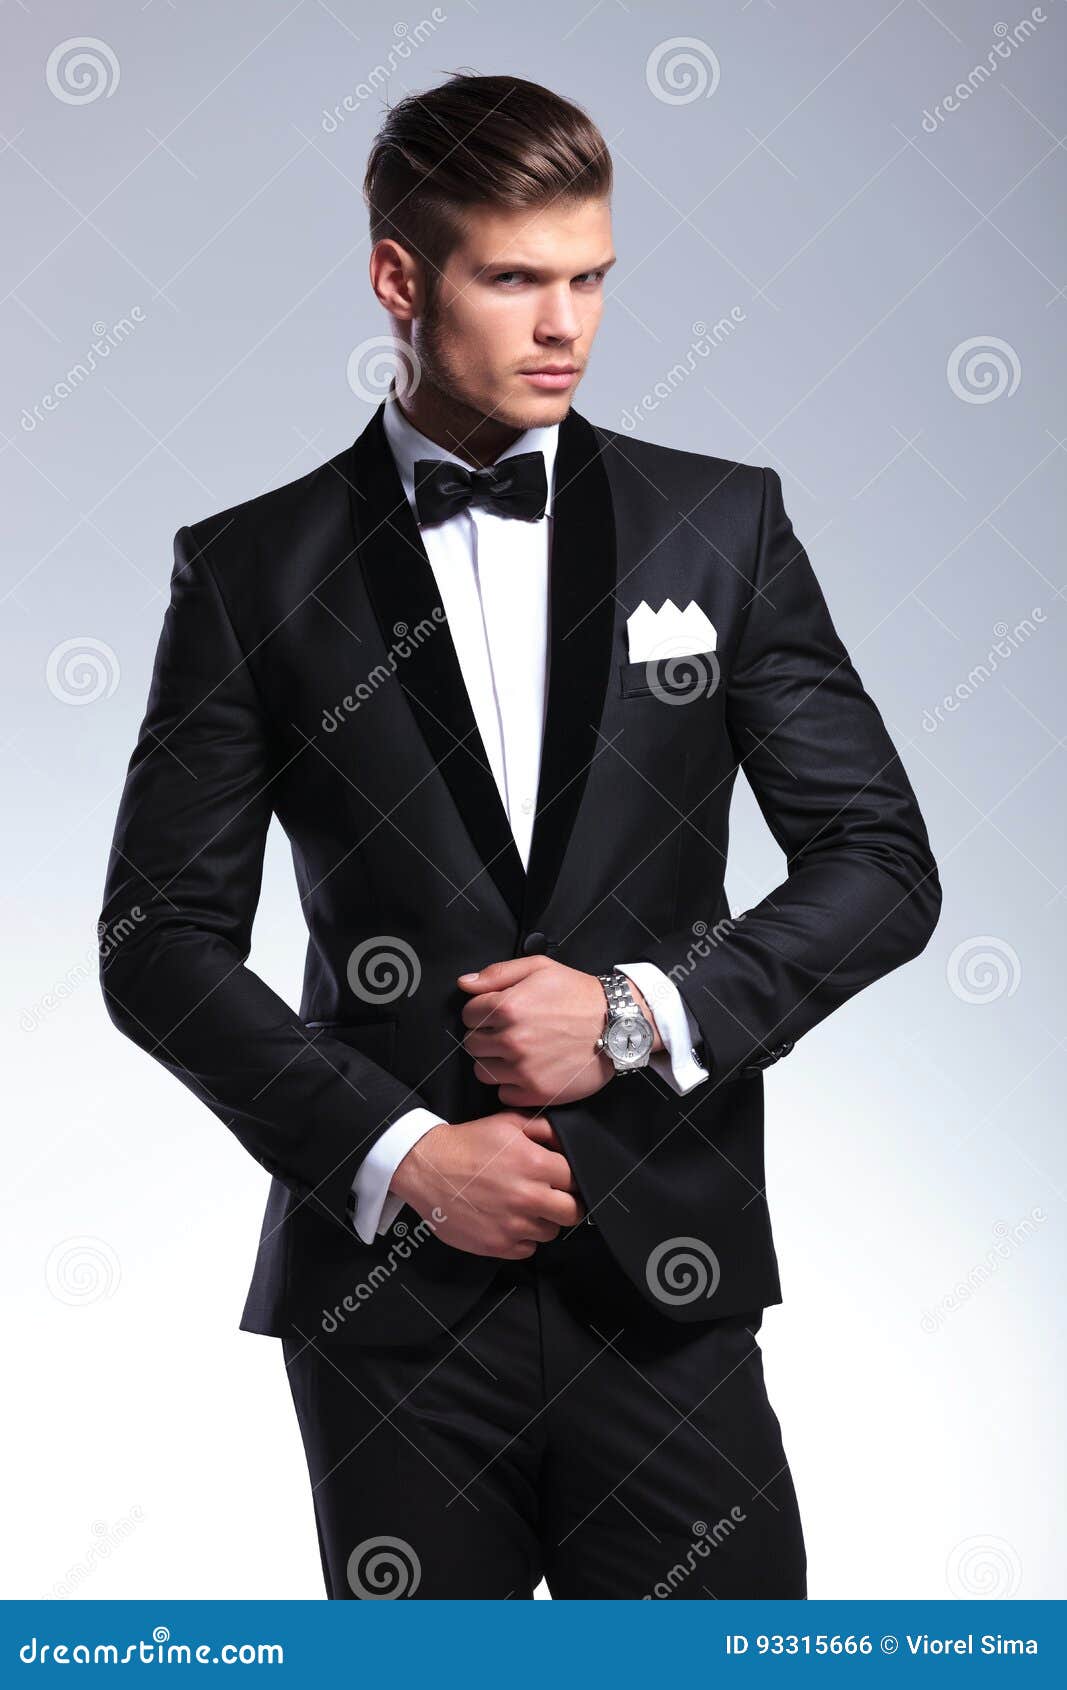 Business man adjusts his tux. Elegant young fashion man adjusting tuxedo with both hands while looking at the camera. on gray background